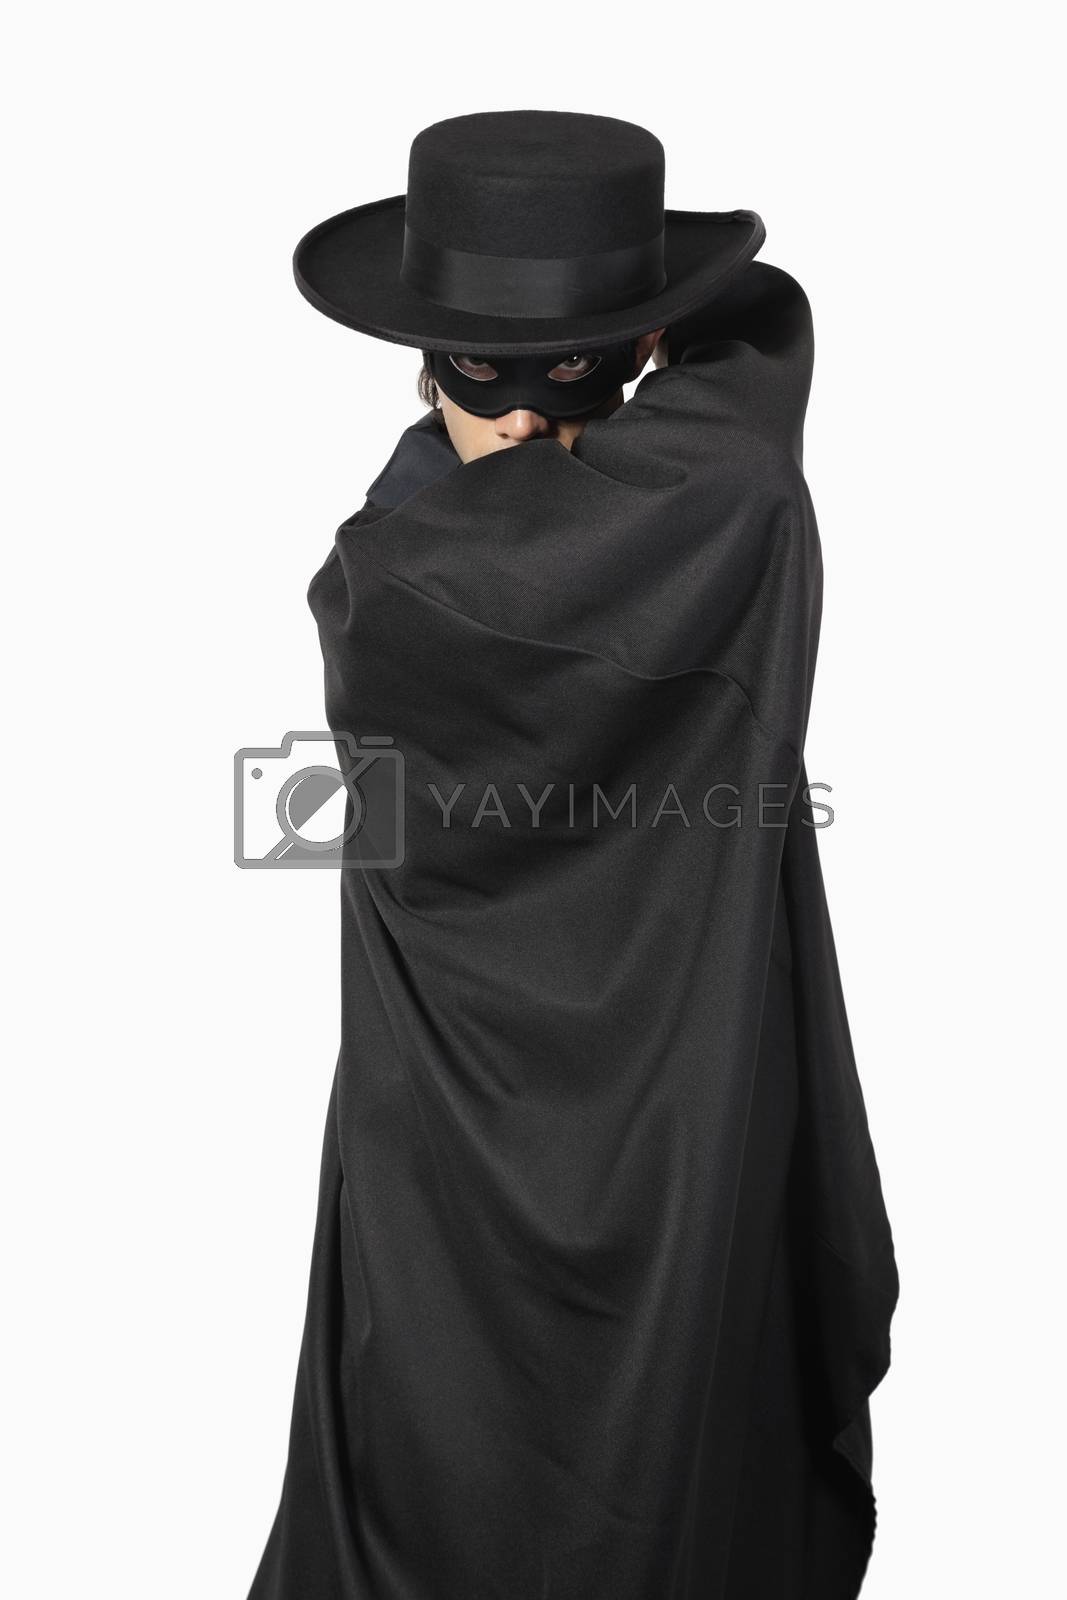 Royalty free image of Portrait of young man dressed as Zorro over gray background by moodboard